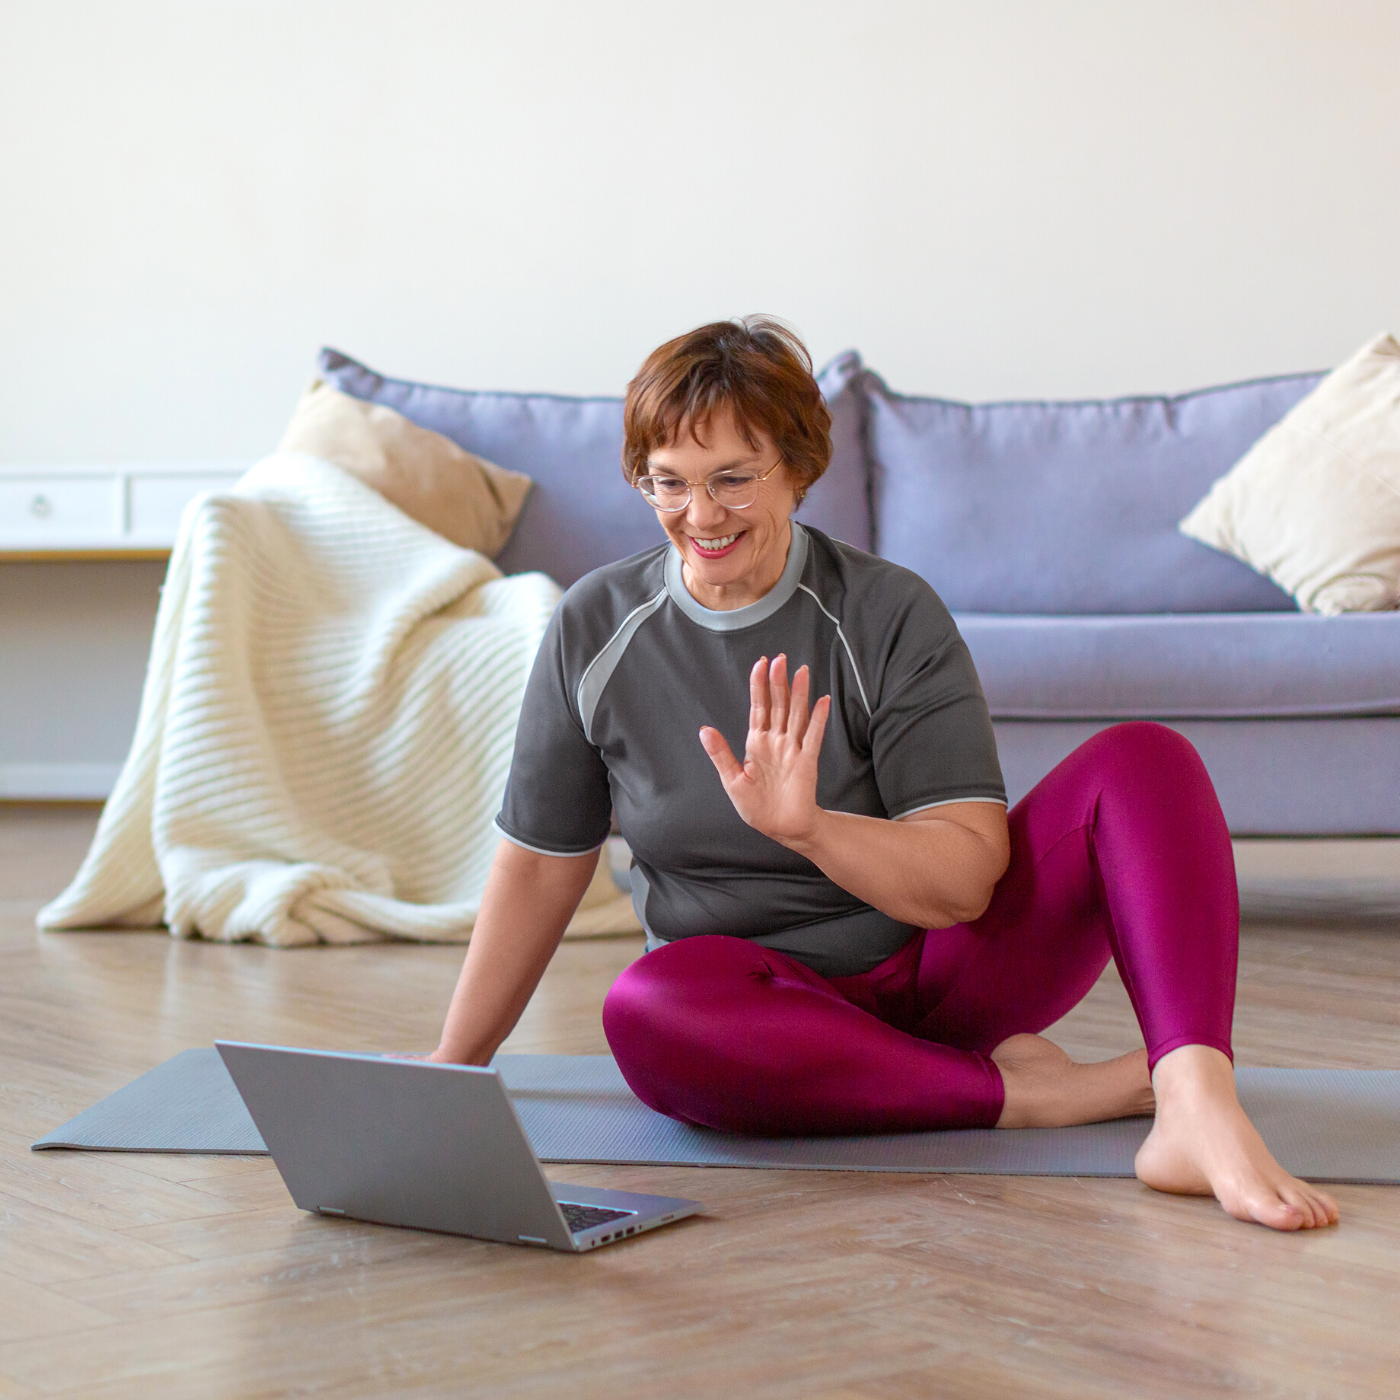 Pilates Over 50 - How To Get Started At Home